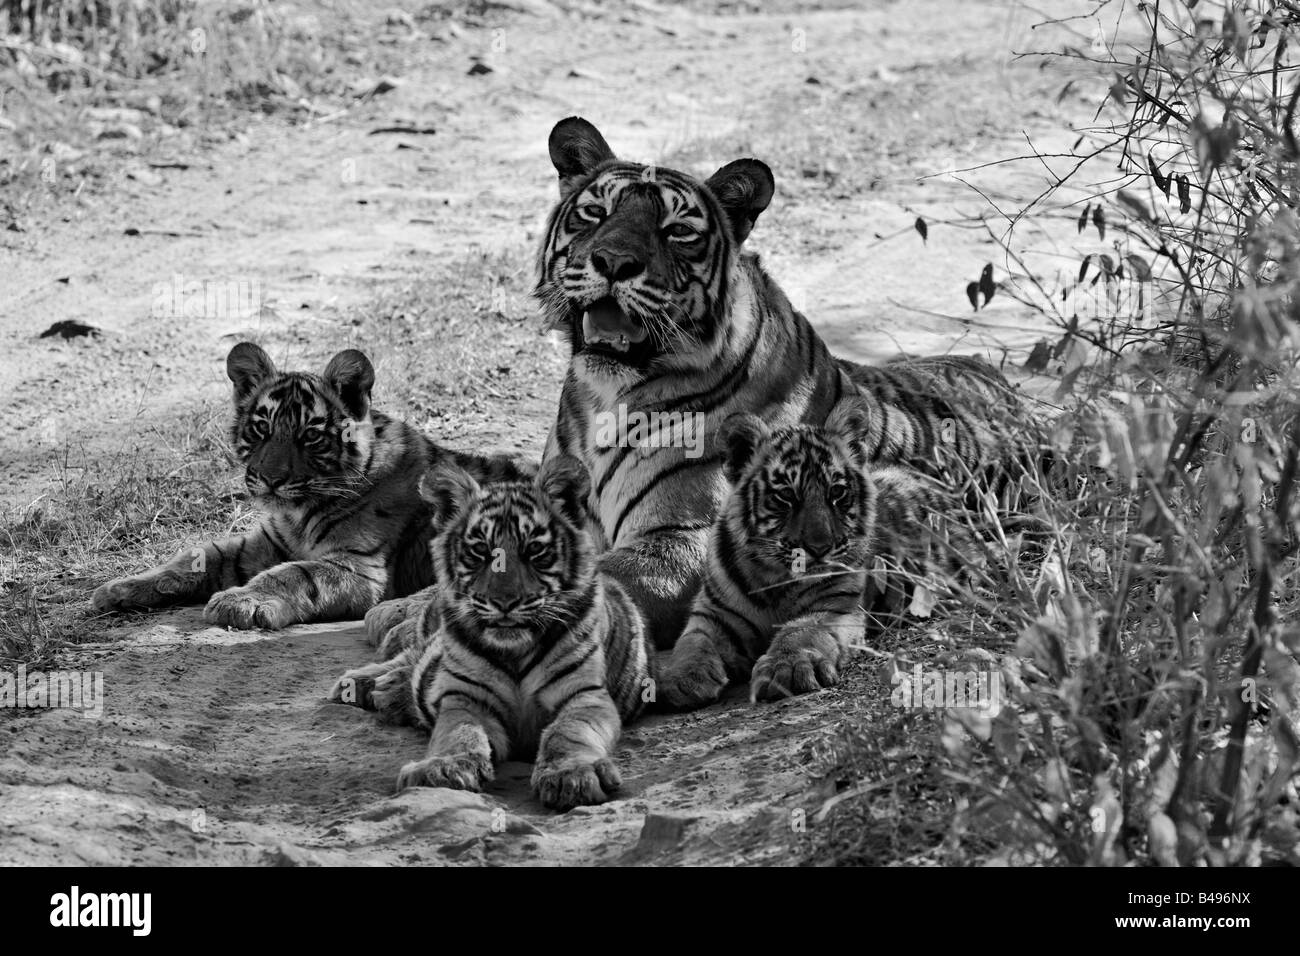 Wild tigress with three young cubs in Ranthambore national park in black and white Stock Photo